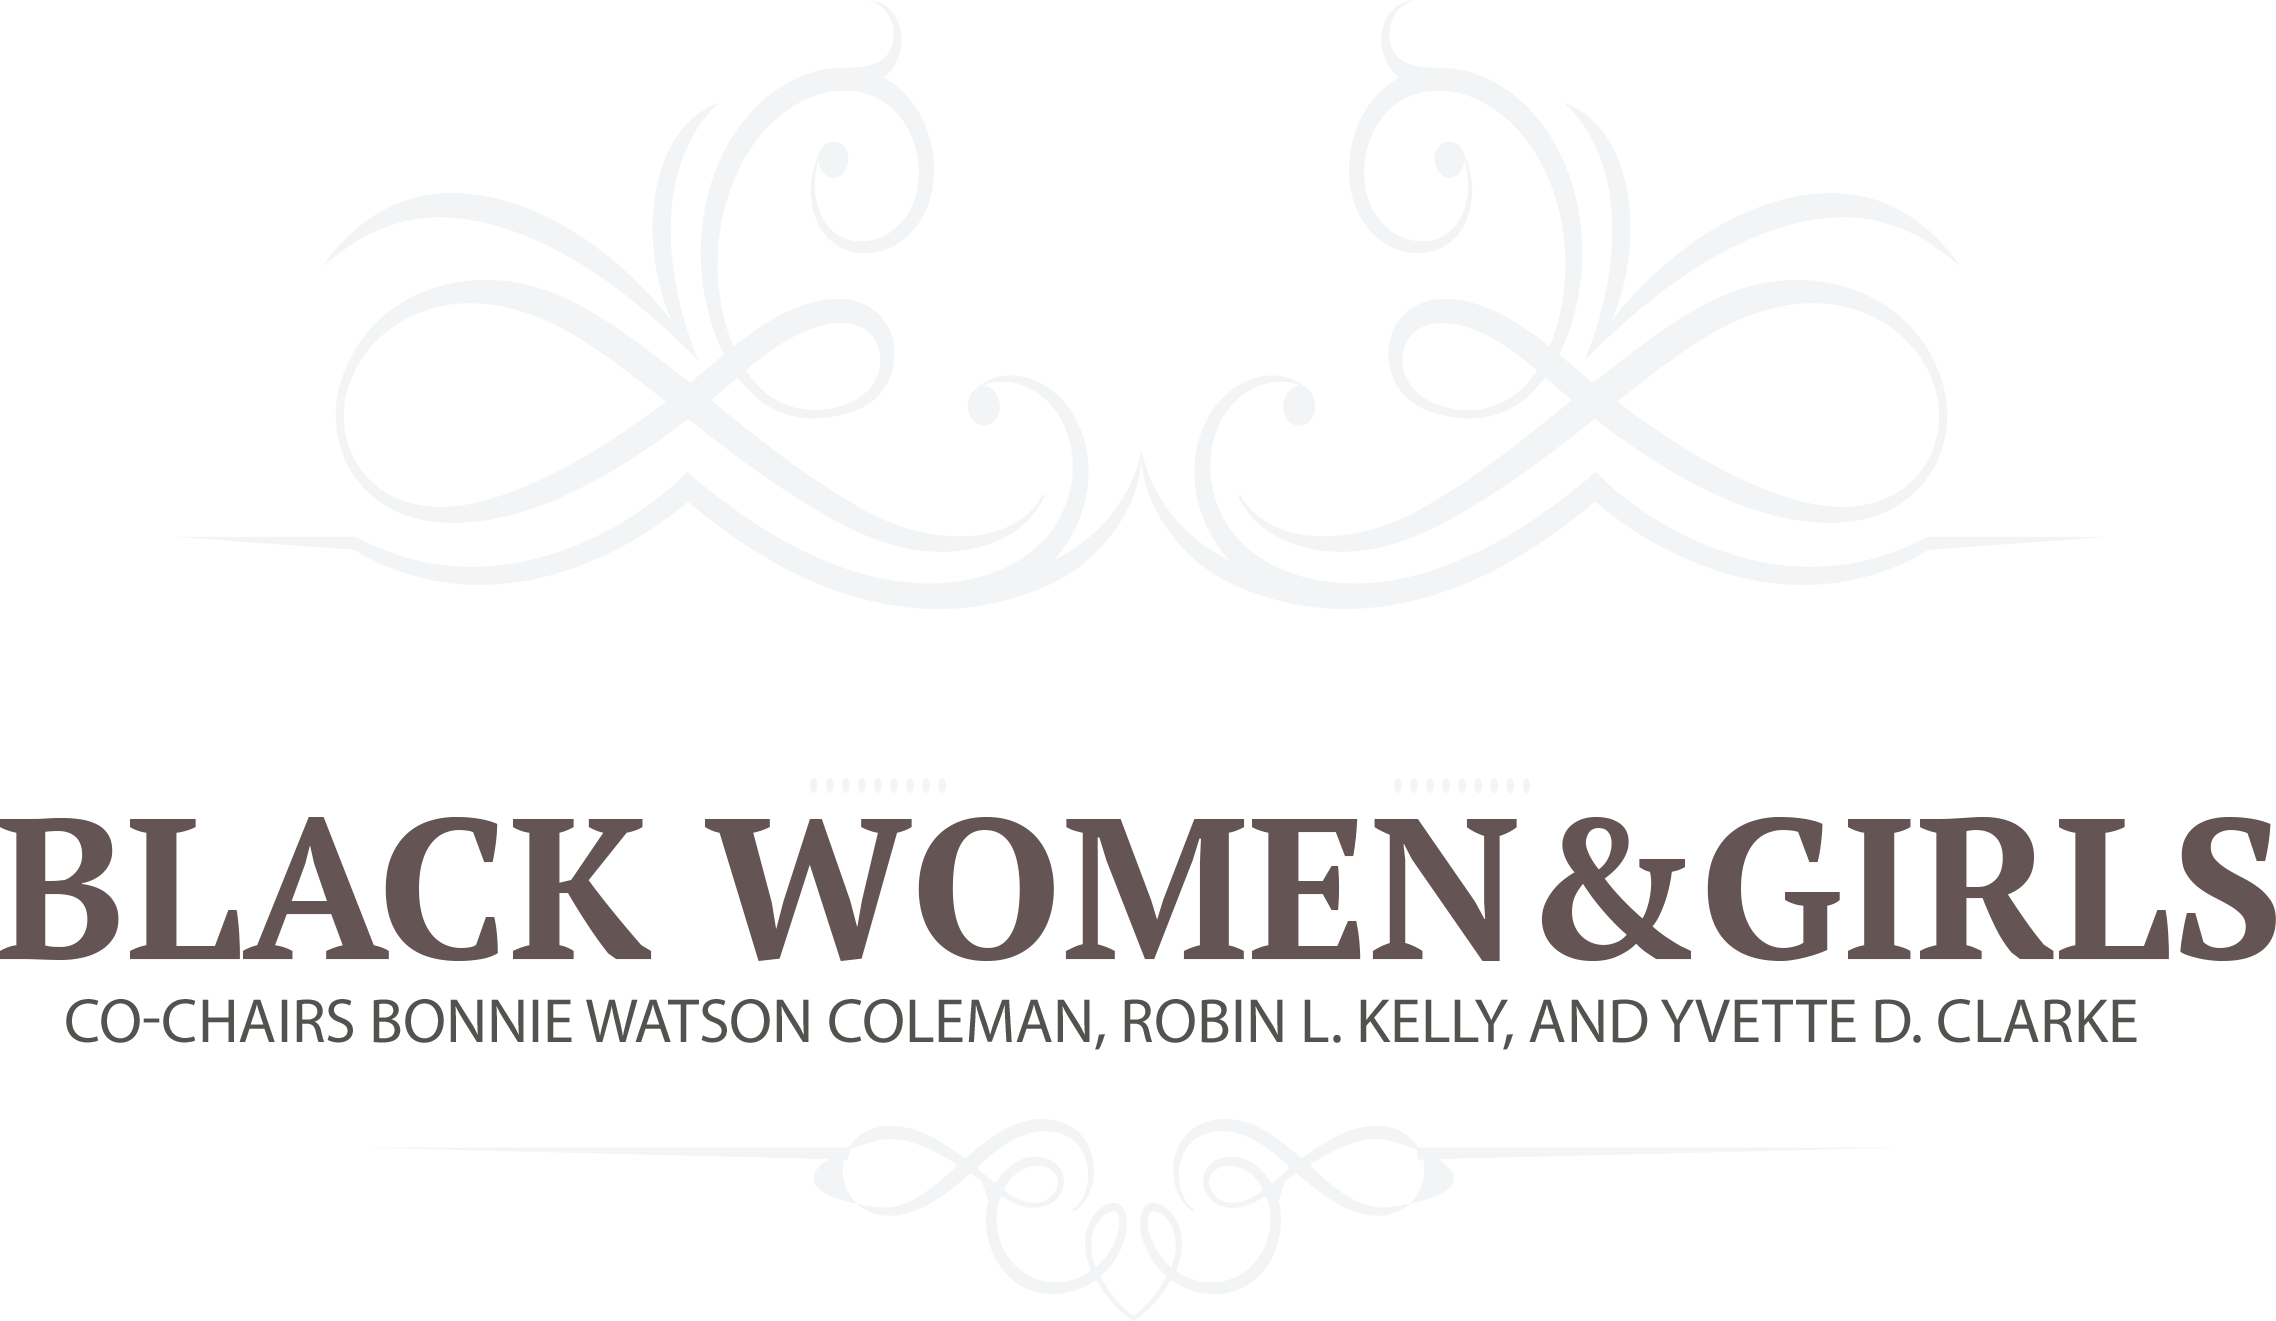 The Congressional Caucus on Black Women & Girls, Co-chairs: Bonnie Watson Coleman, Robin L. Kelly, and Yvette D. Clarke